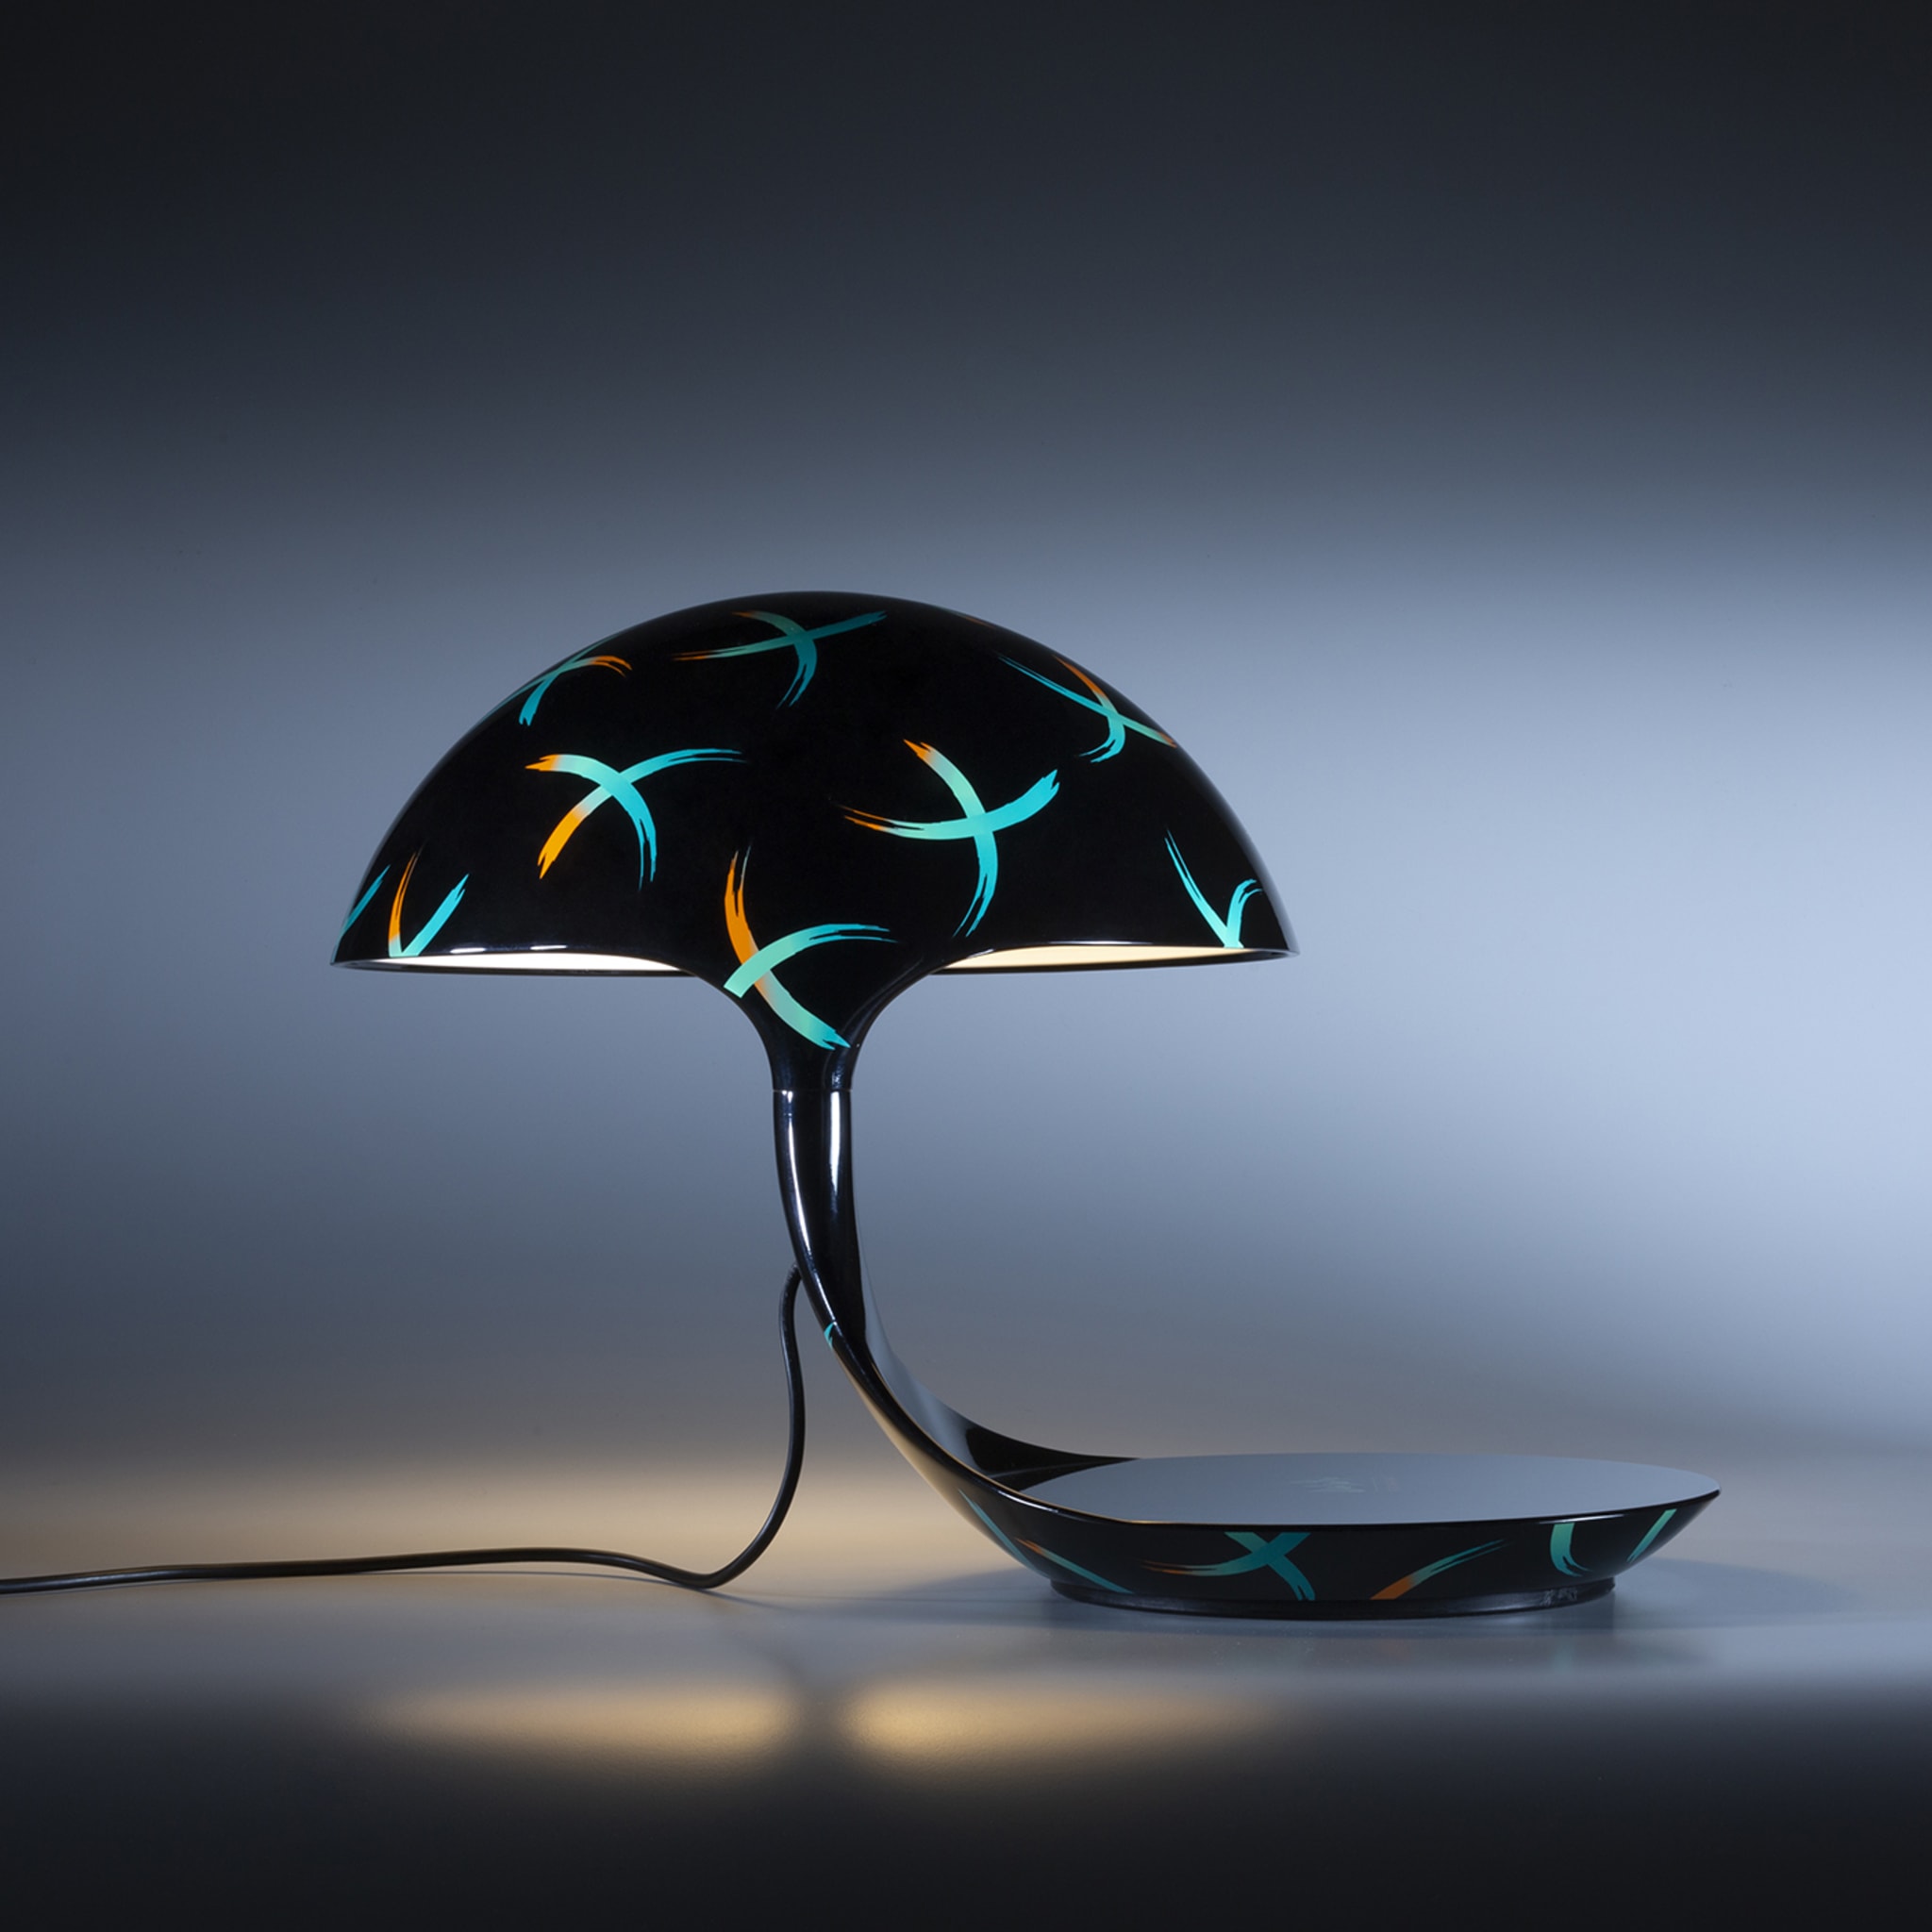 Cobra Texture Polychrome Table Lamp by Studio Natural - Alternative view 1